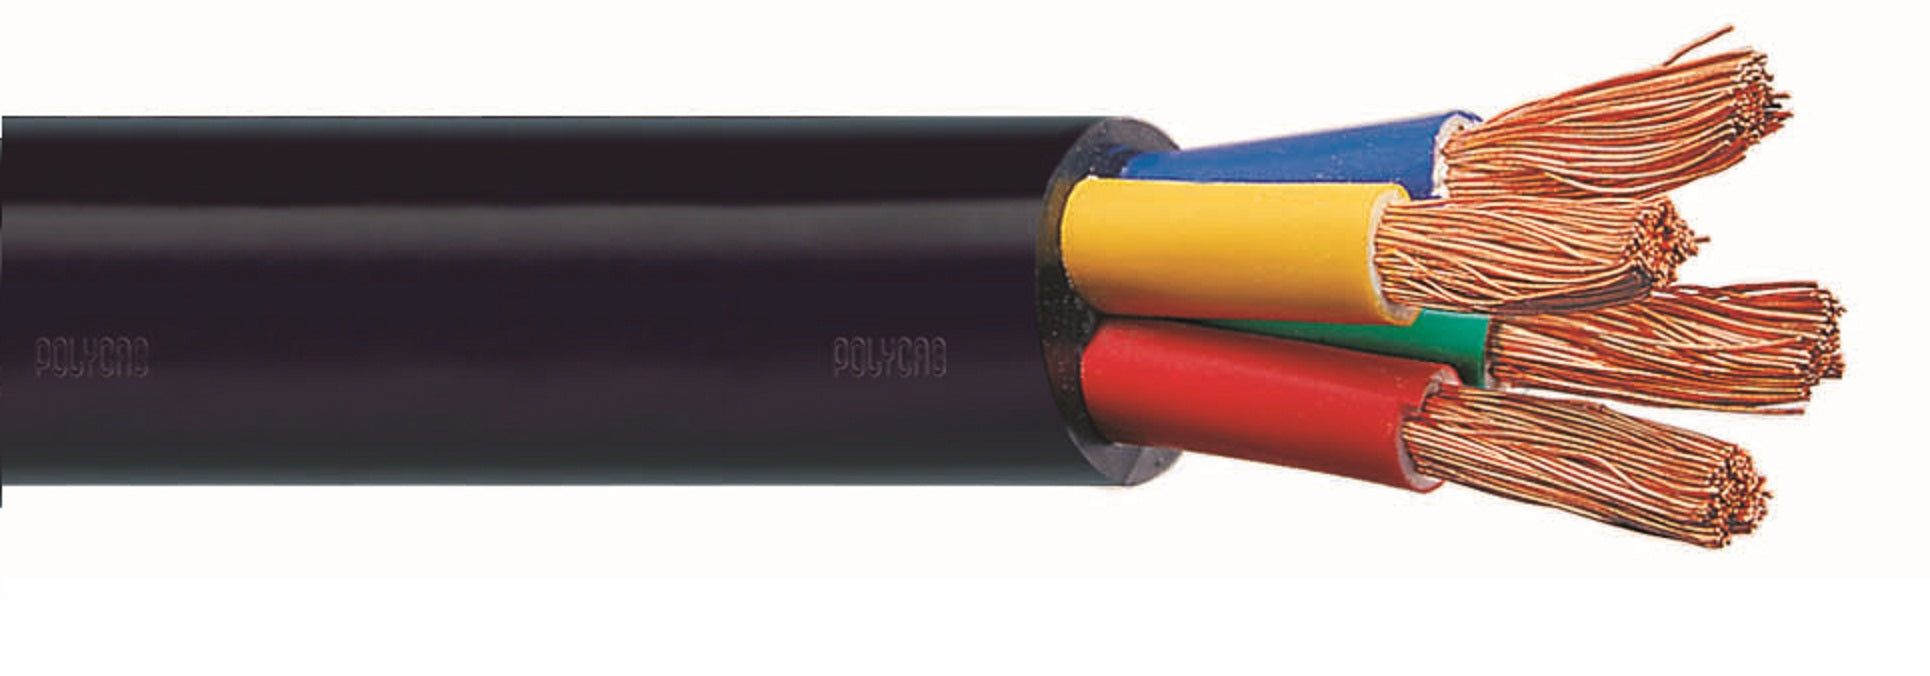 Polycab 25 Sqmm, 4 core Pvc Insulated & Sheathed Copper Flexible Cable Black (1 Meter)